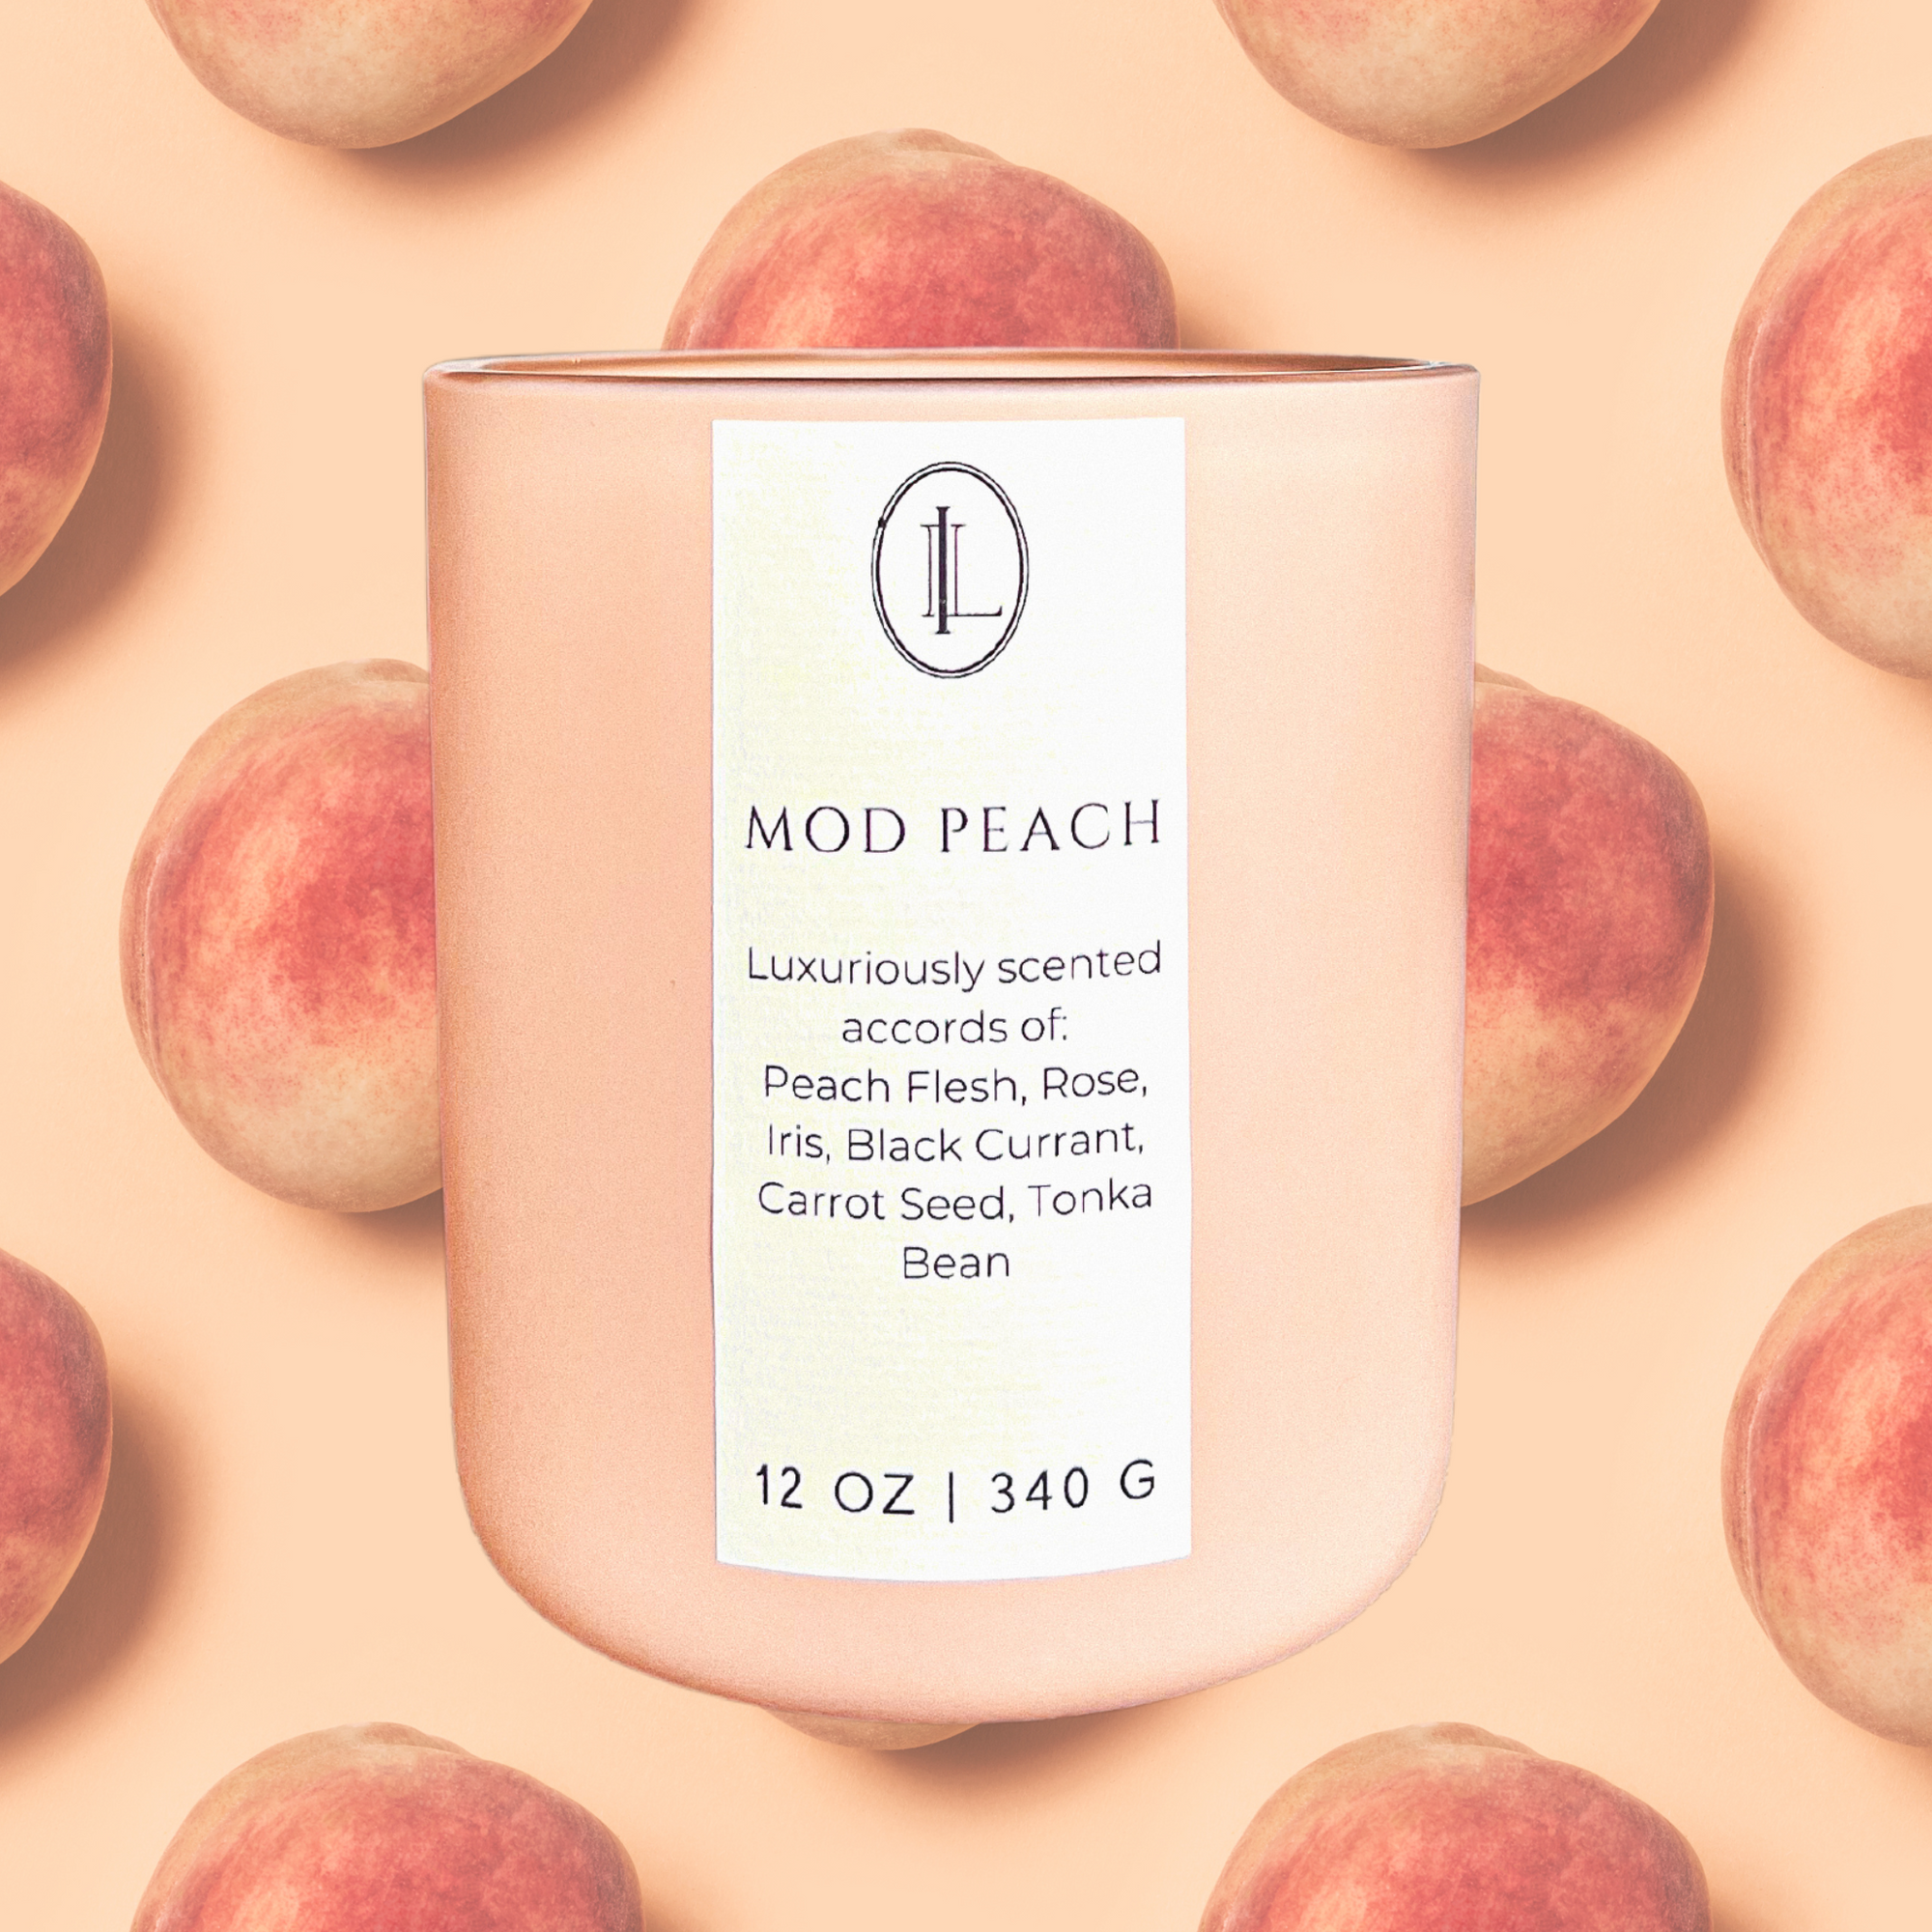 Mod Peach Candle Image With Peaches in the Background